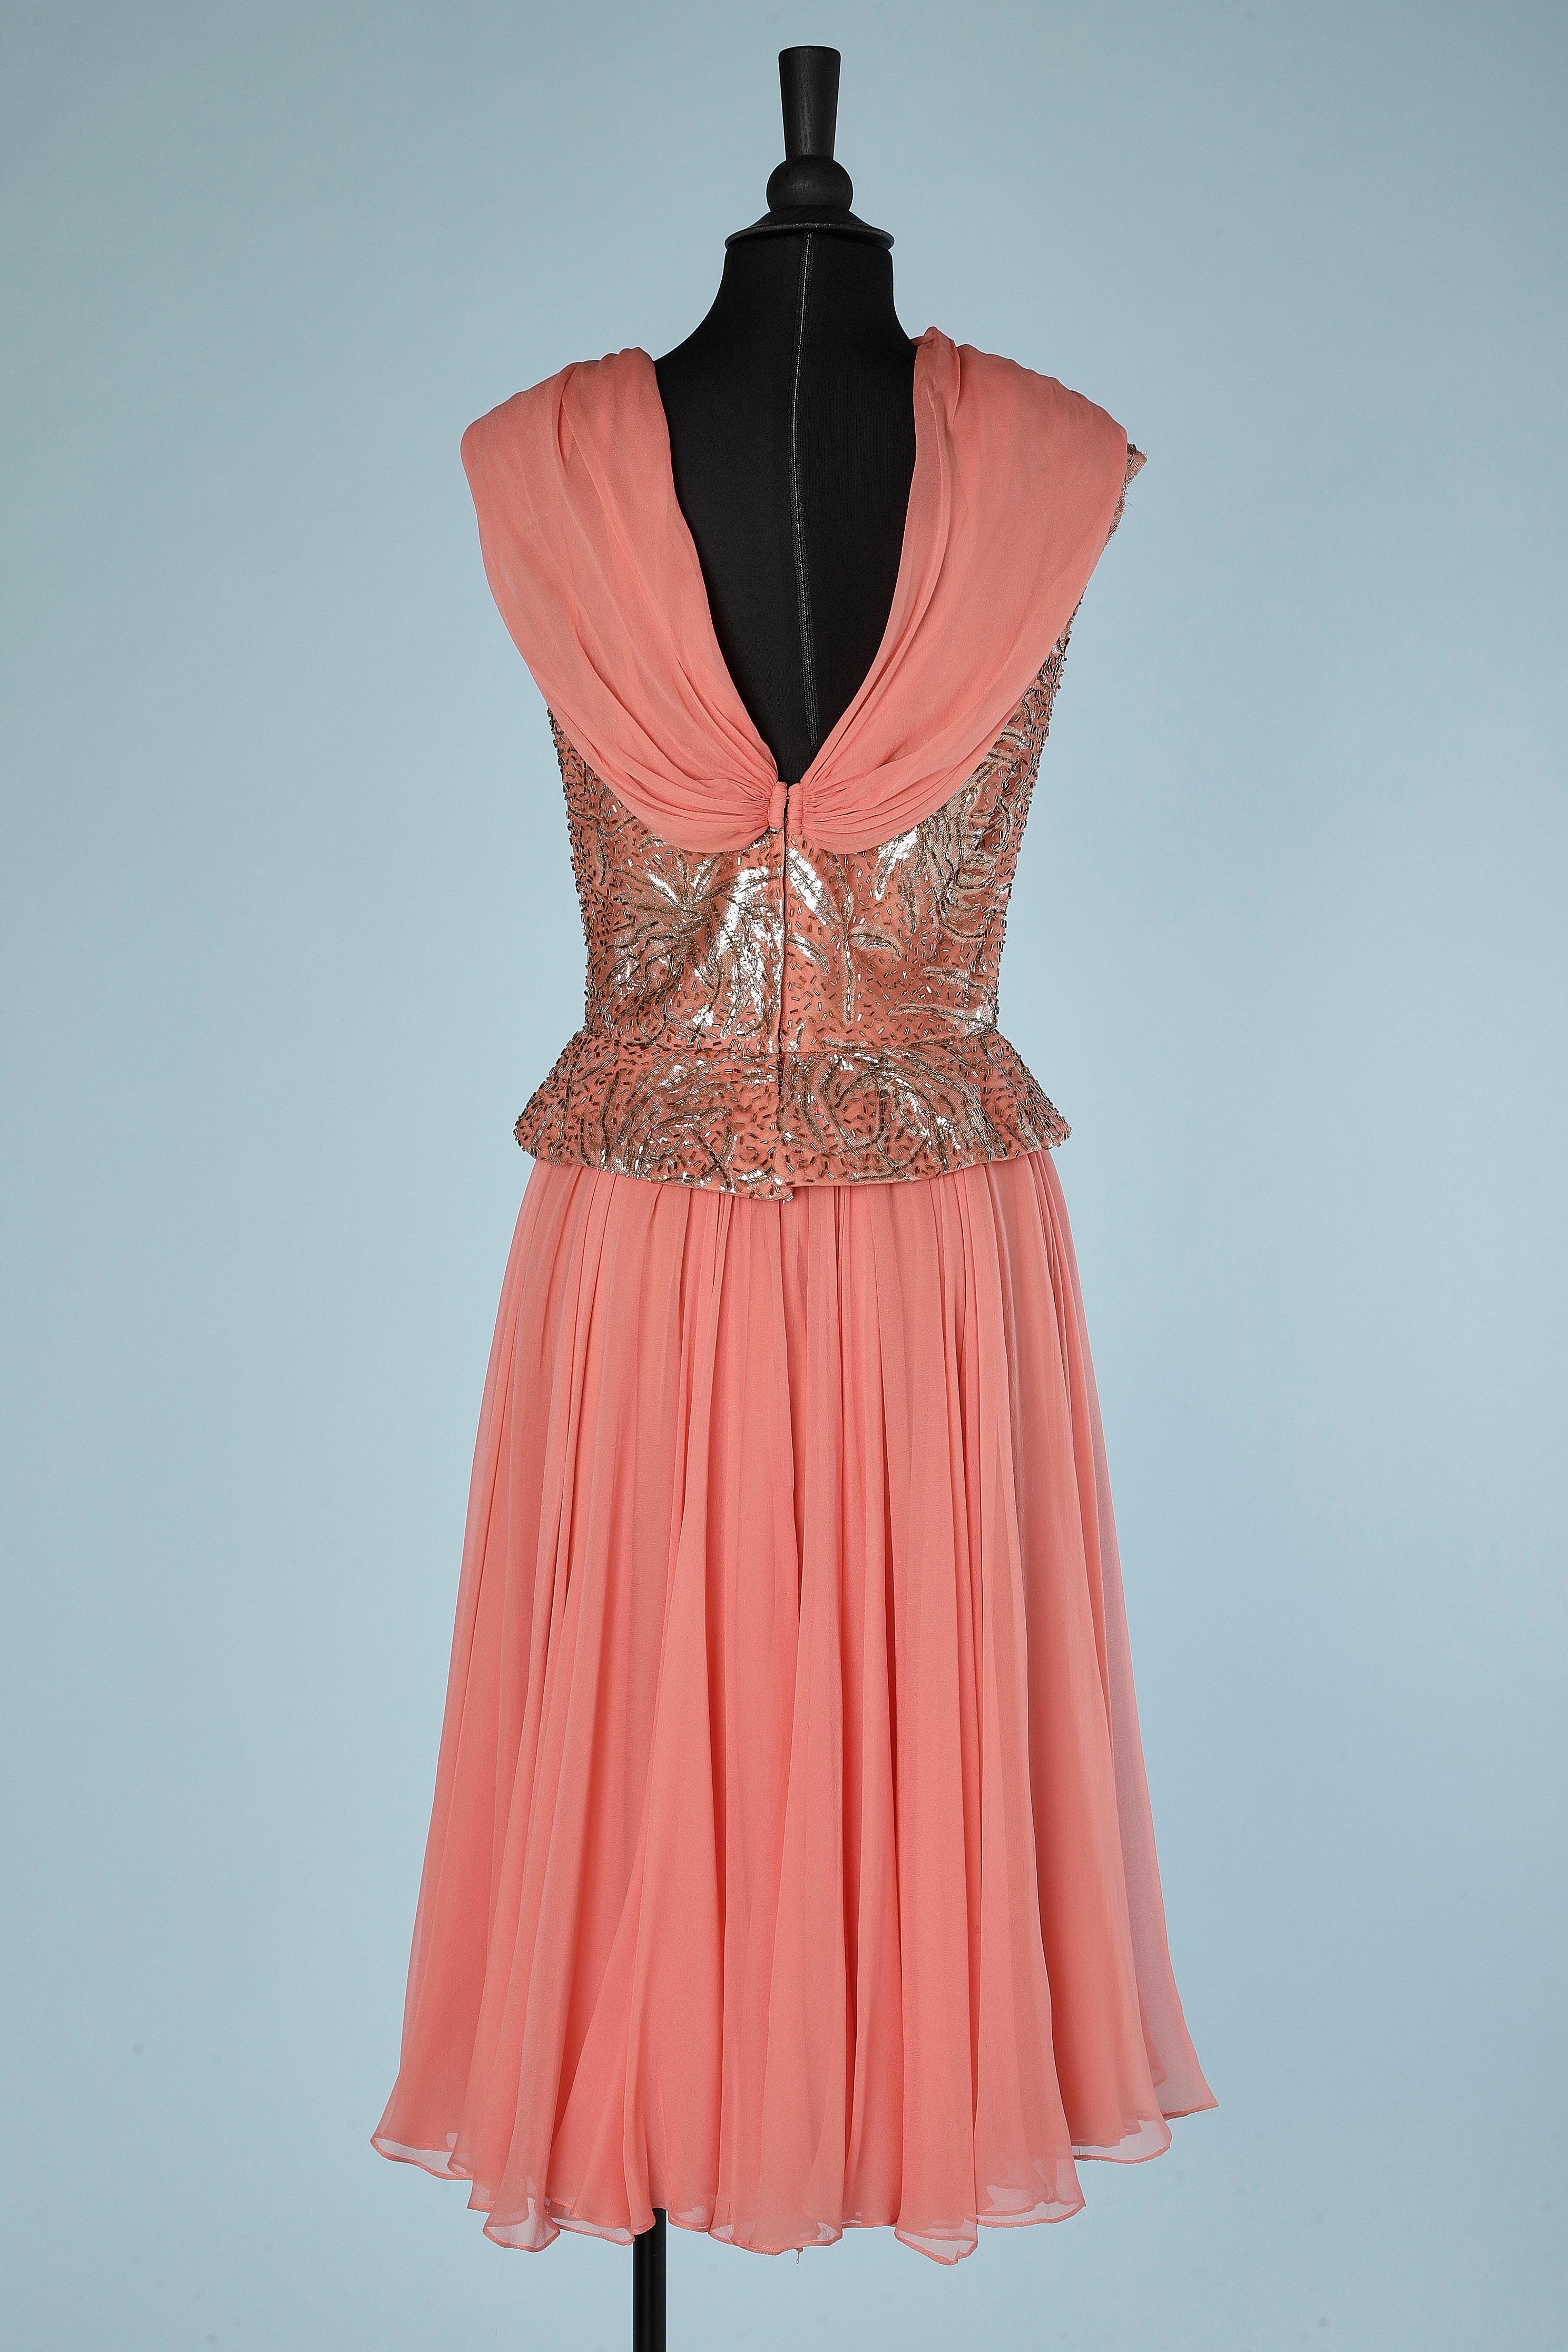 Salmon pink chiffon dress and beaded lurex Pat Sandler for Hightlight For Sale 1